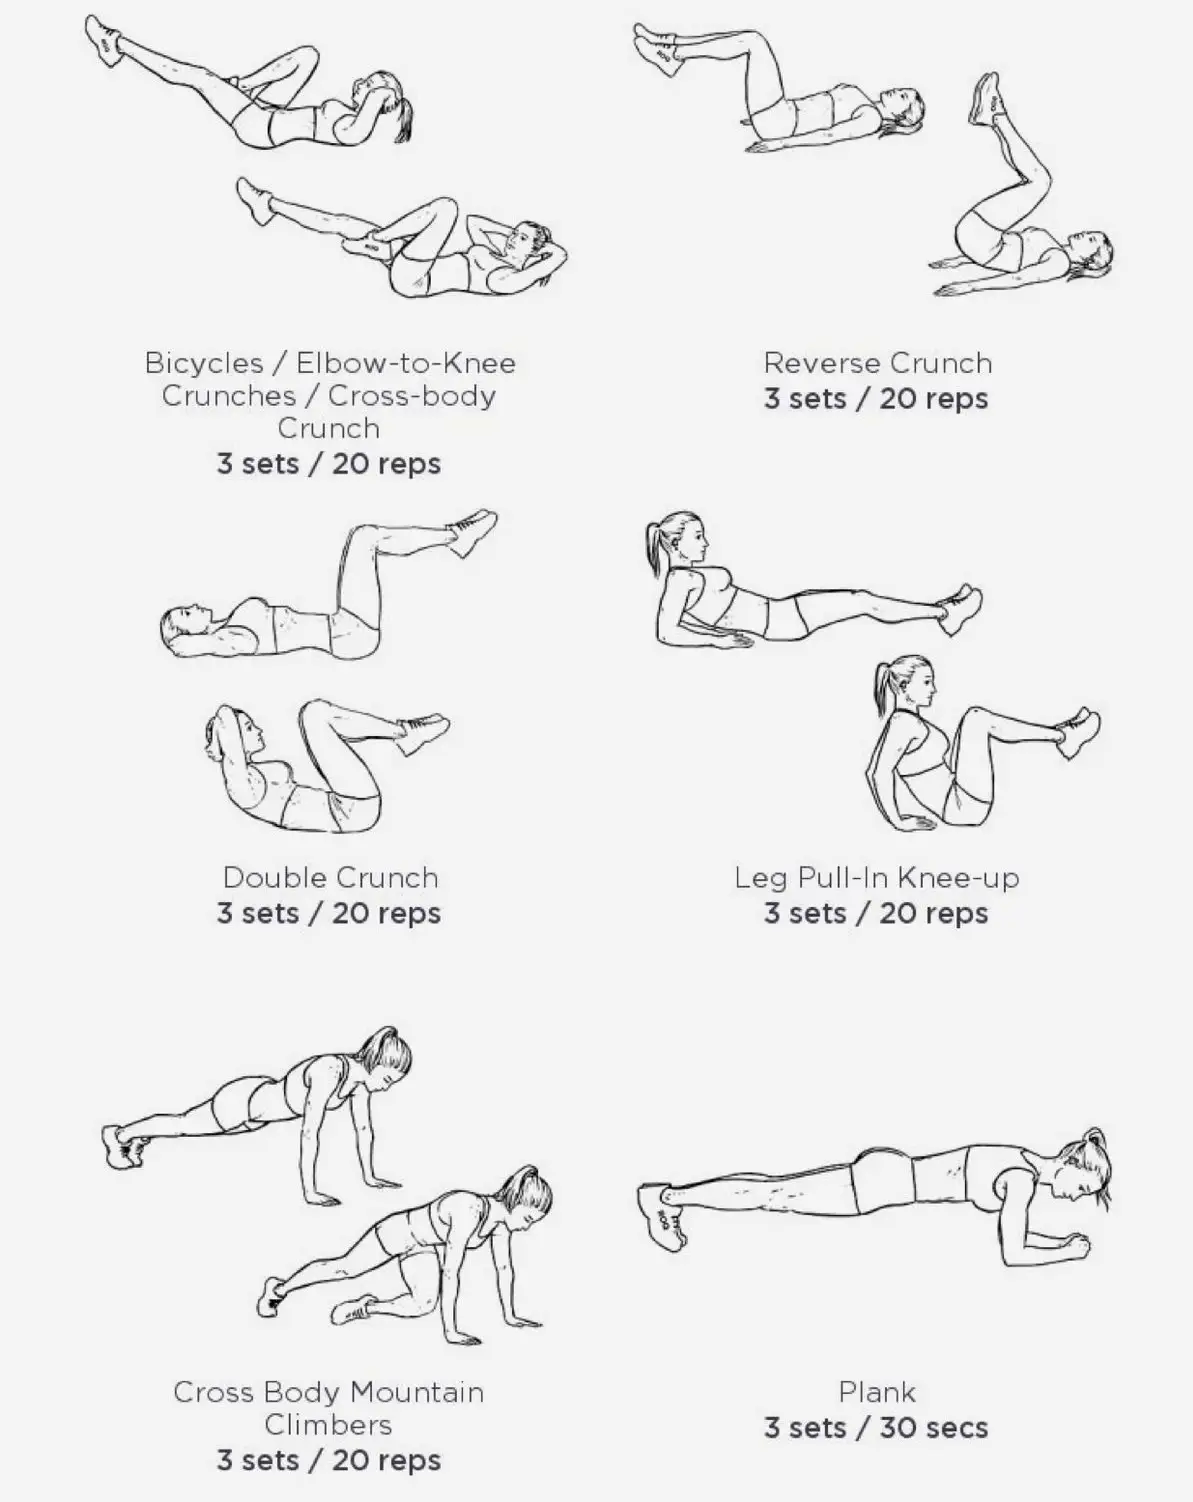 RECOVERY Standing Abs 💪 Day 12 💪 Body Shaping for Women over 50 